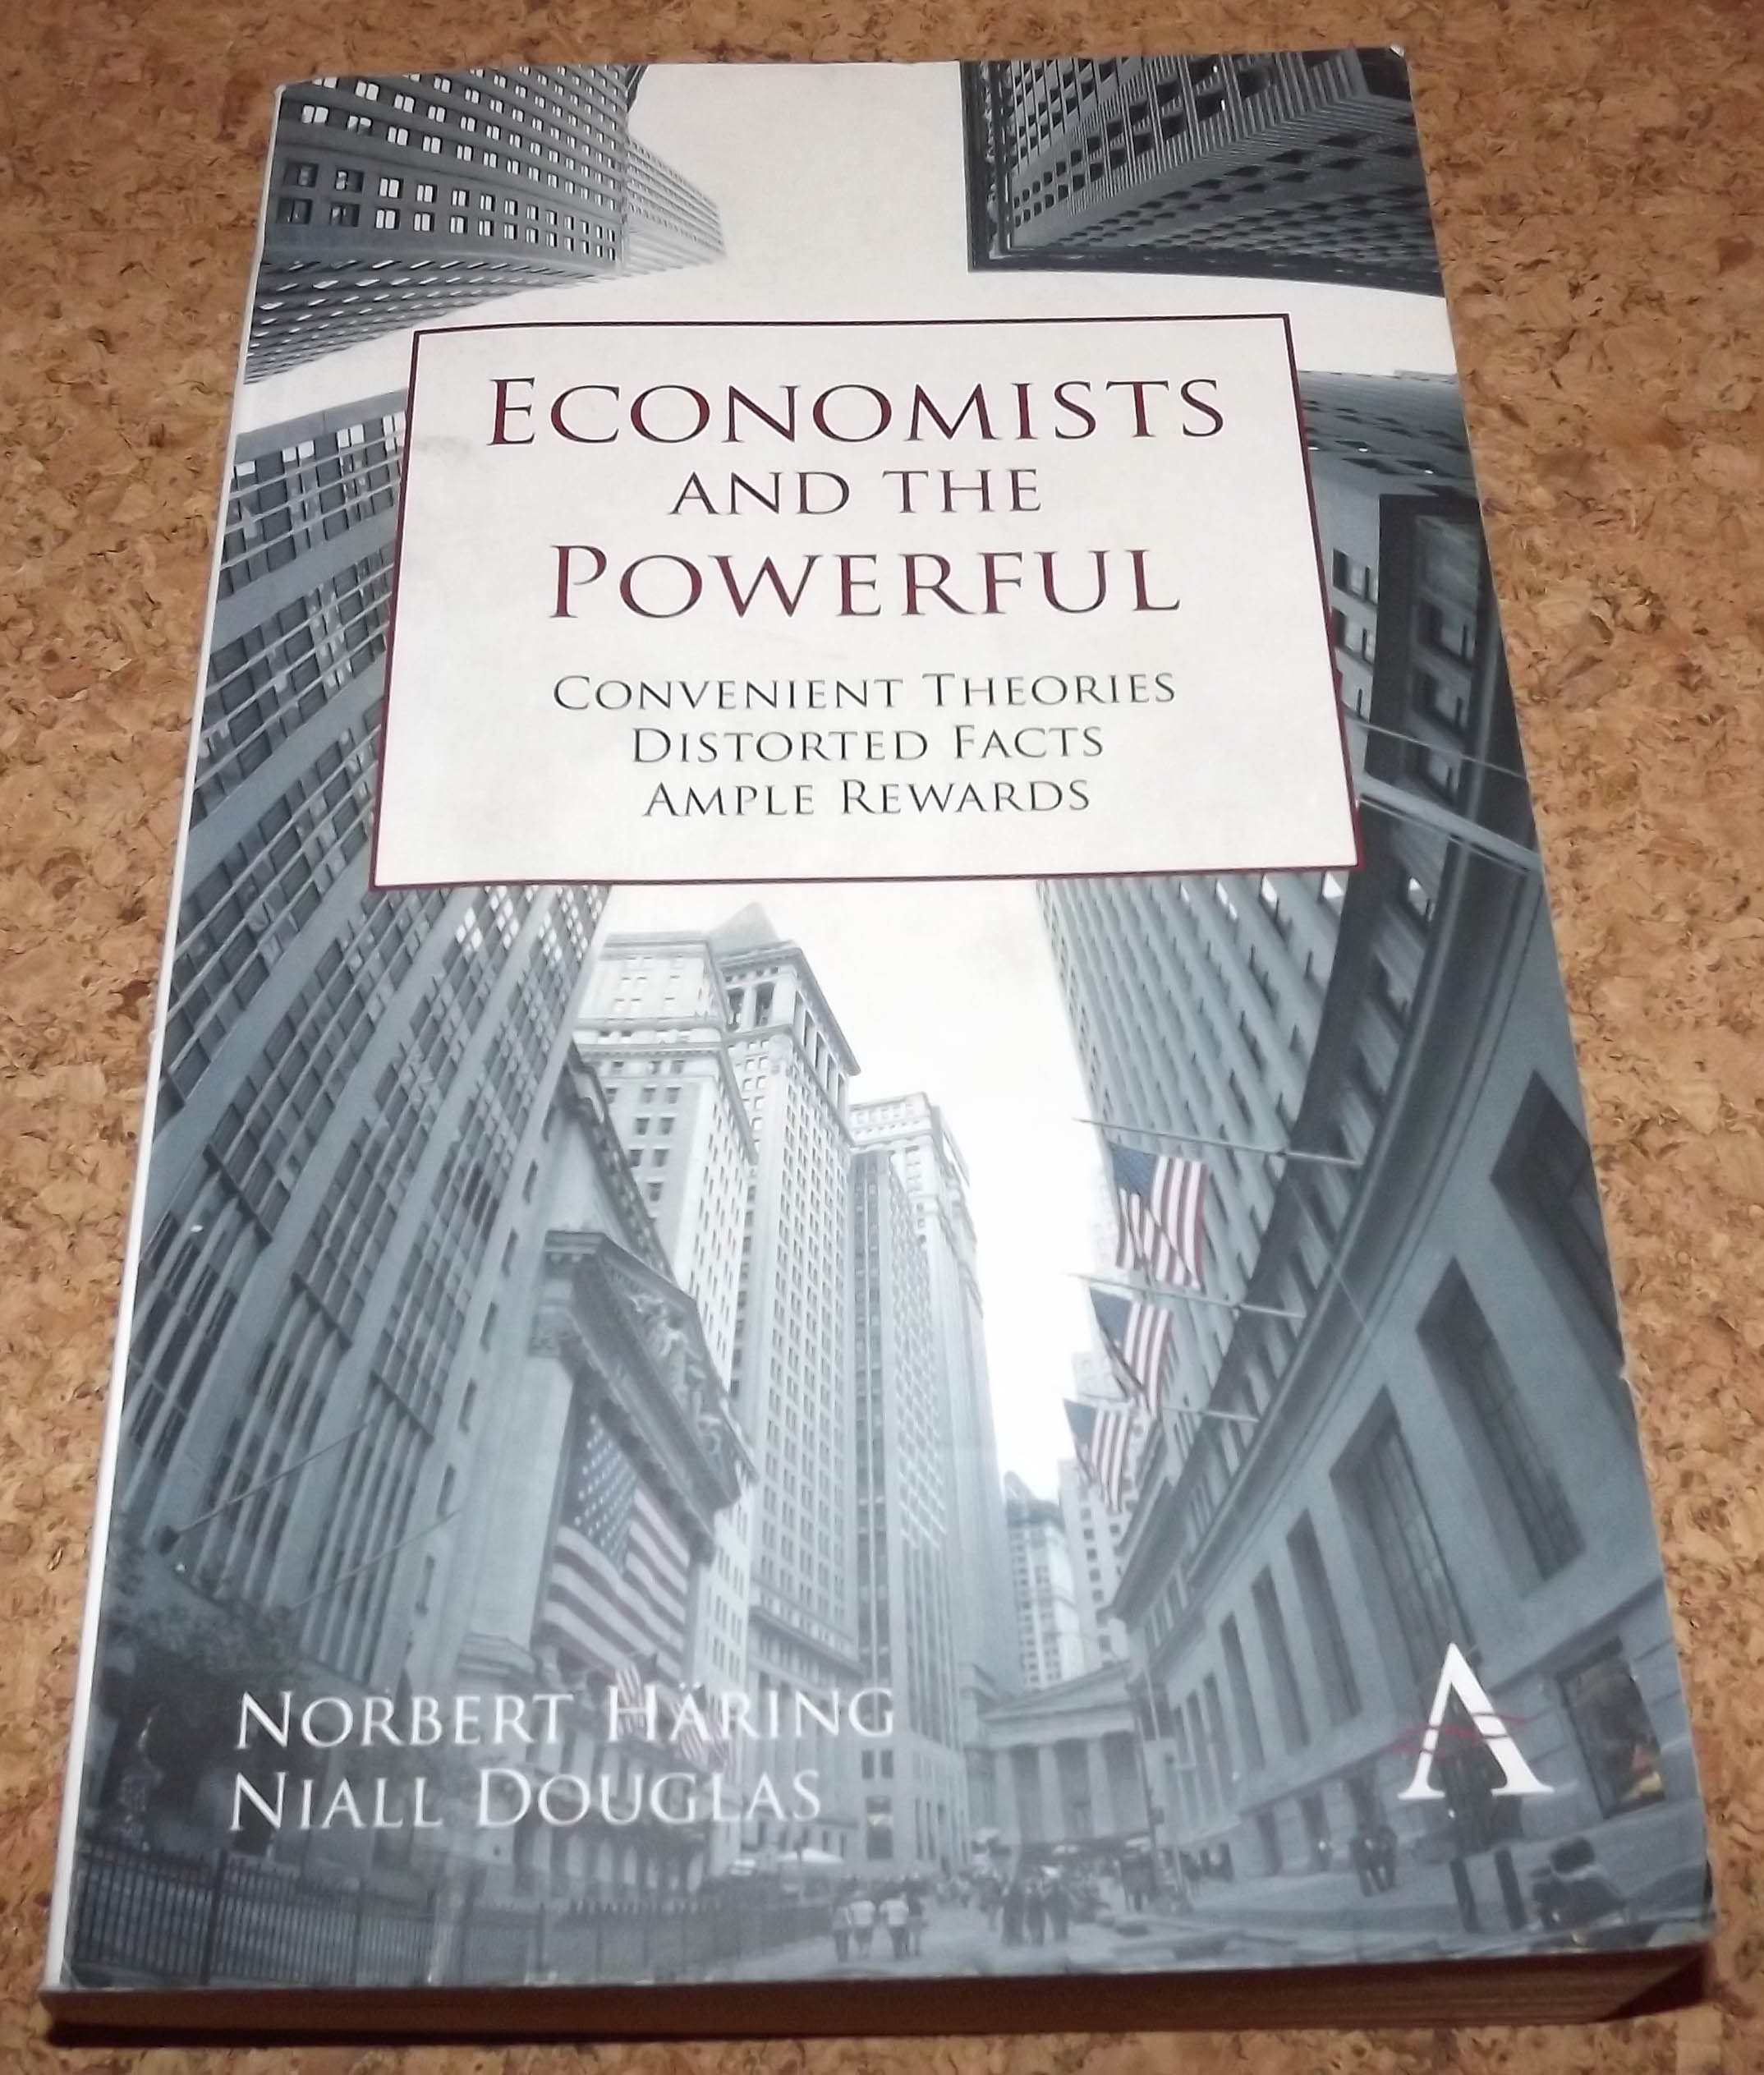 Economists and the Powerful: Convenient Theories, Distorted Facts, Ample Rewards (Anthem Other Canon Economics)